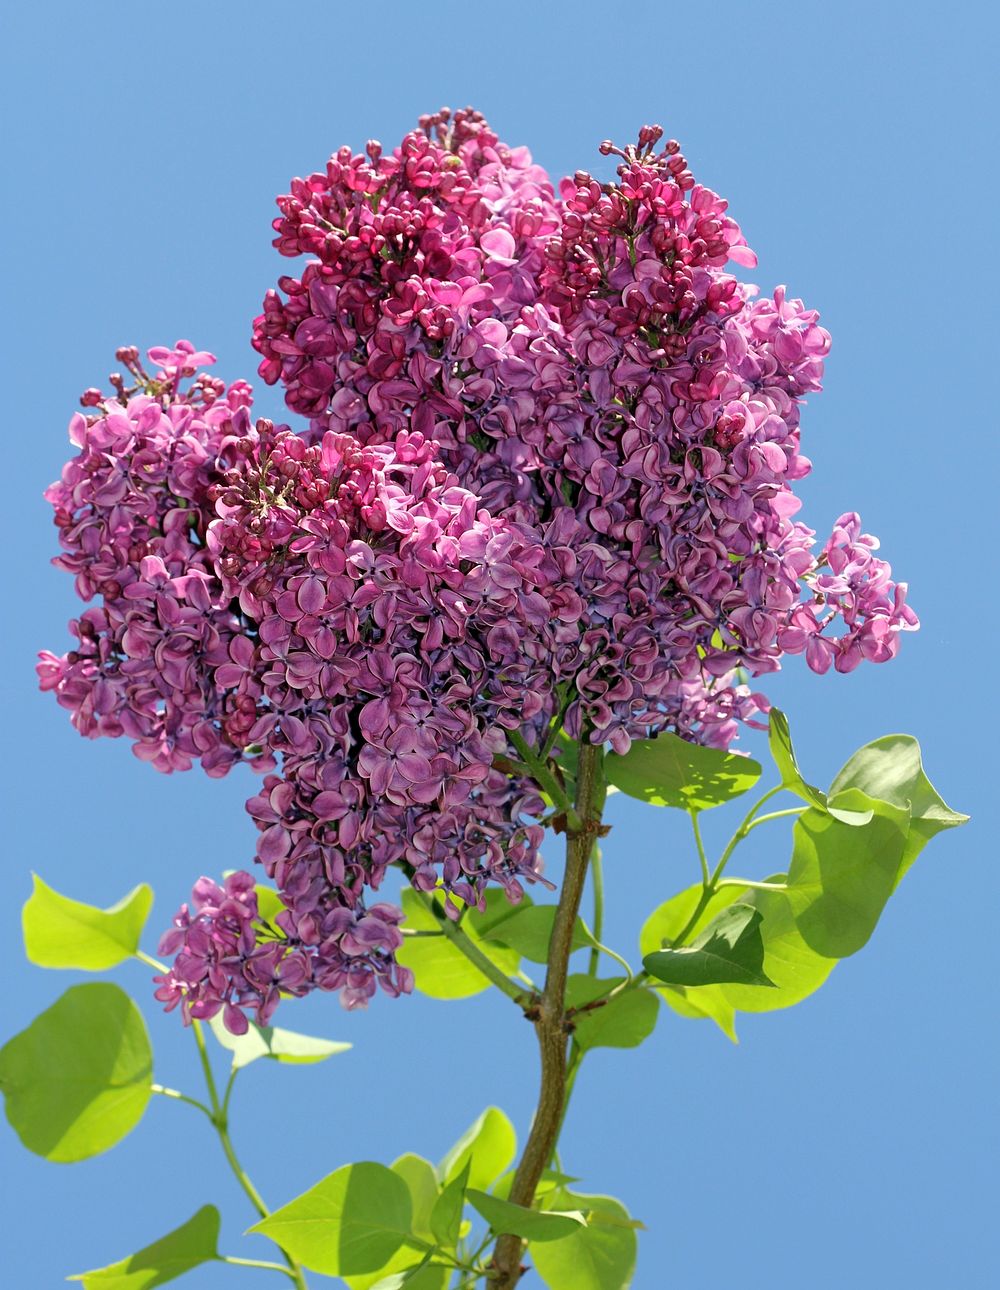 Lilac. Original public domain image from Wikimedia Commons